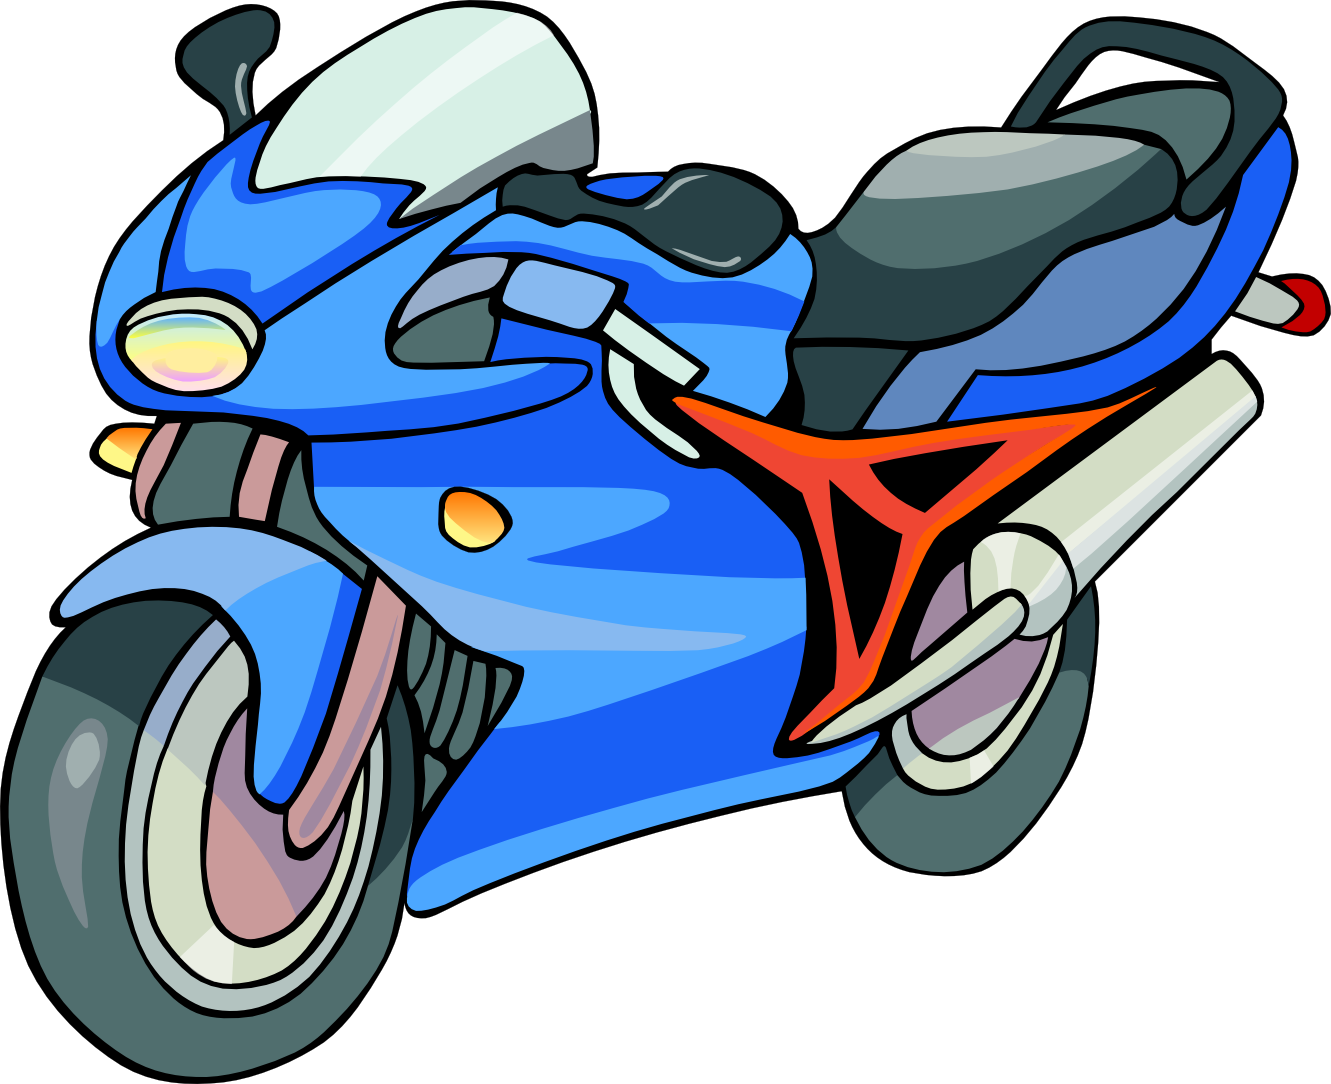 Motorcycle Images Hd Image Clipart